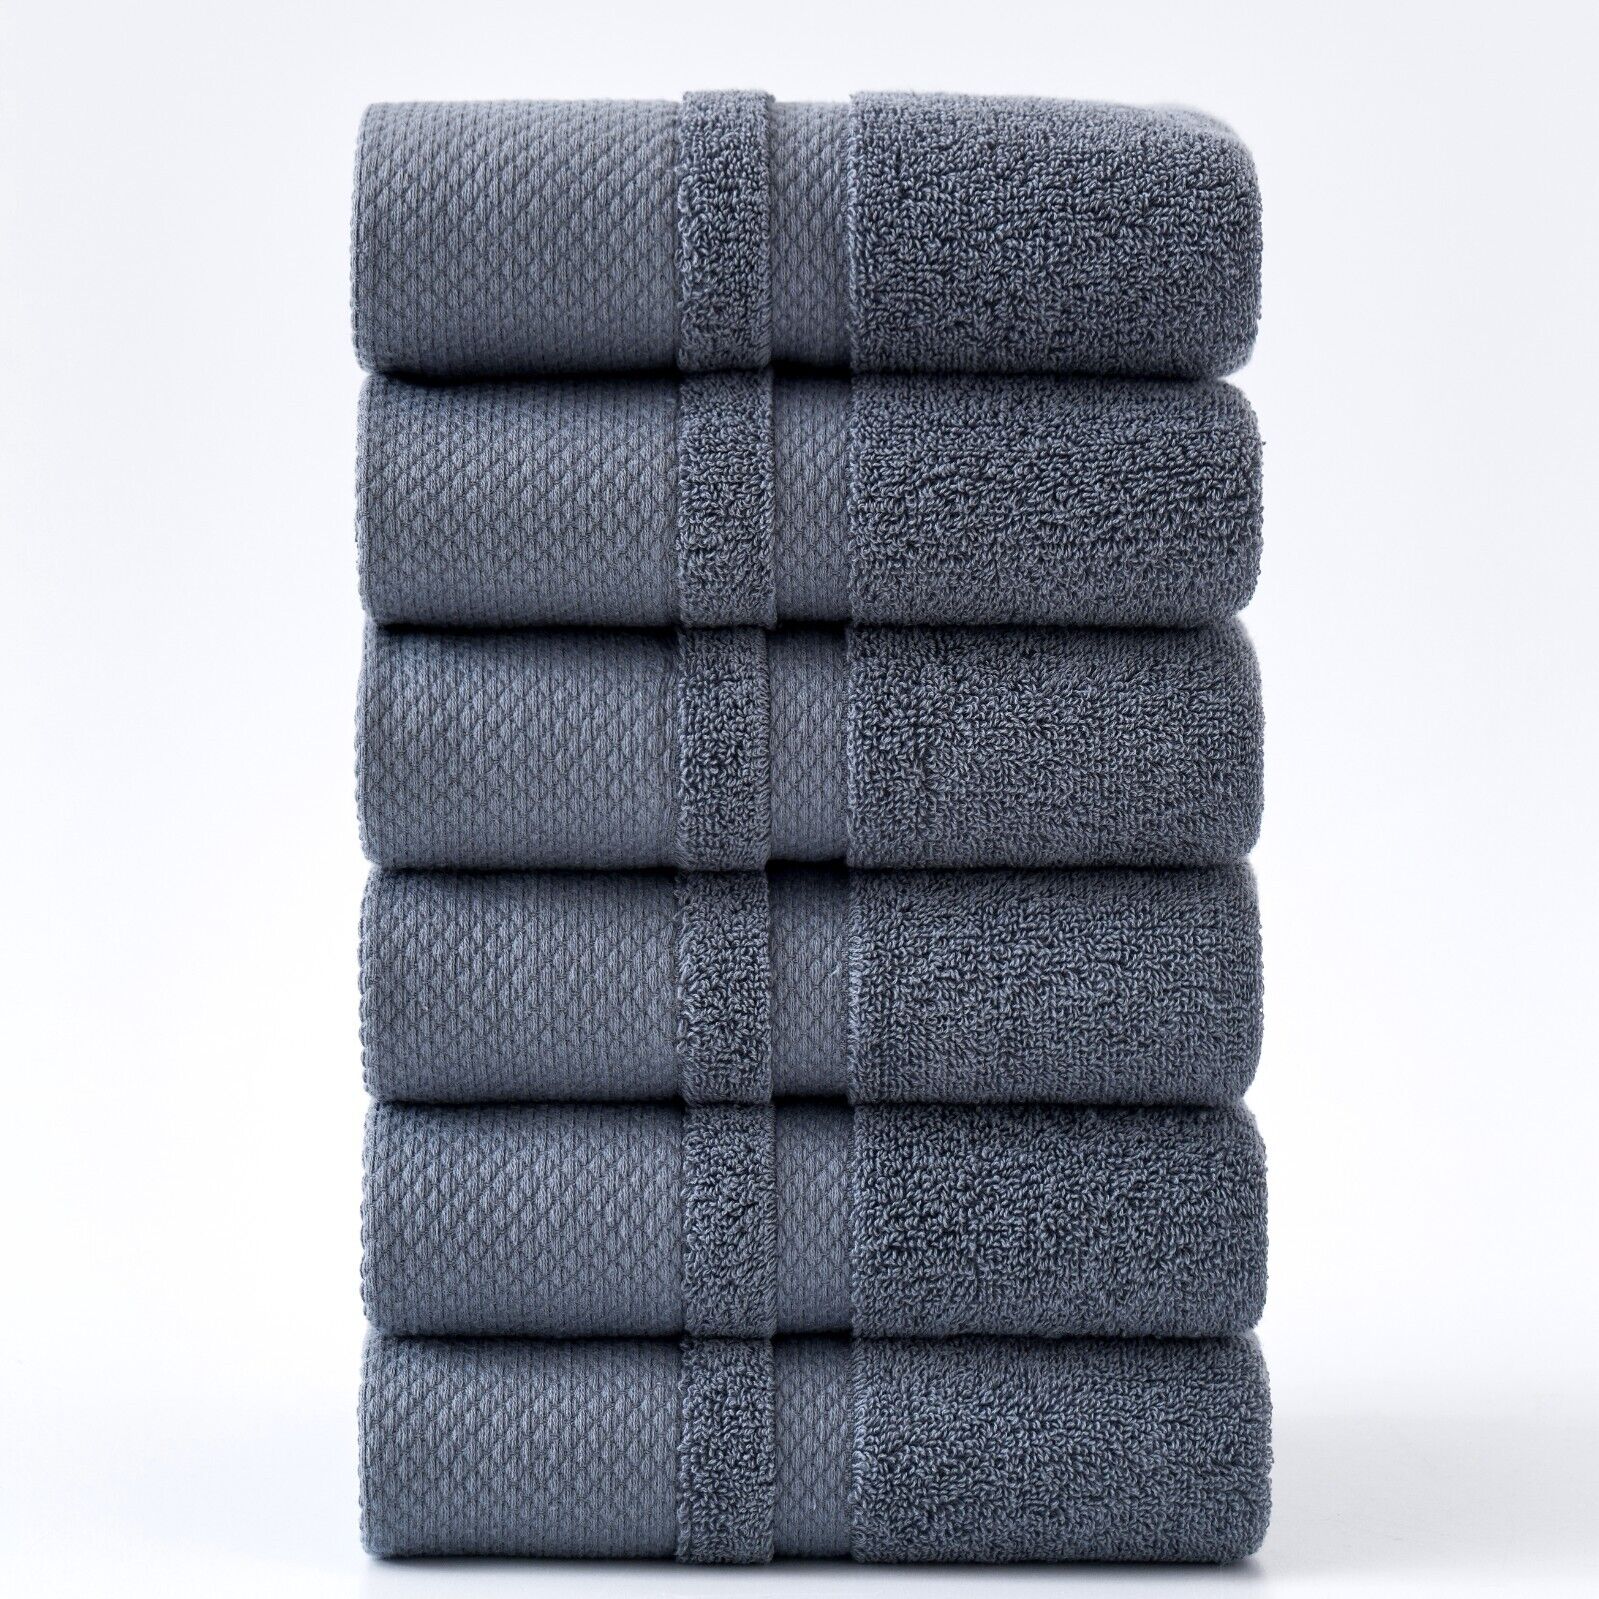 6 Pack Cotton Hand Towels   16 X 28 Inches